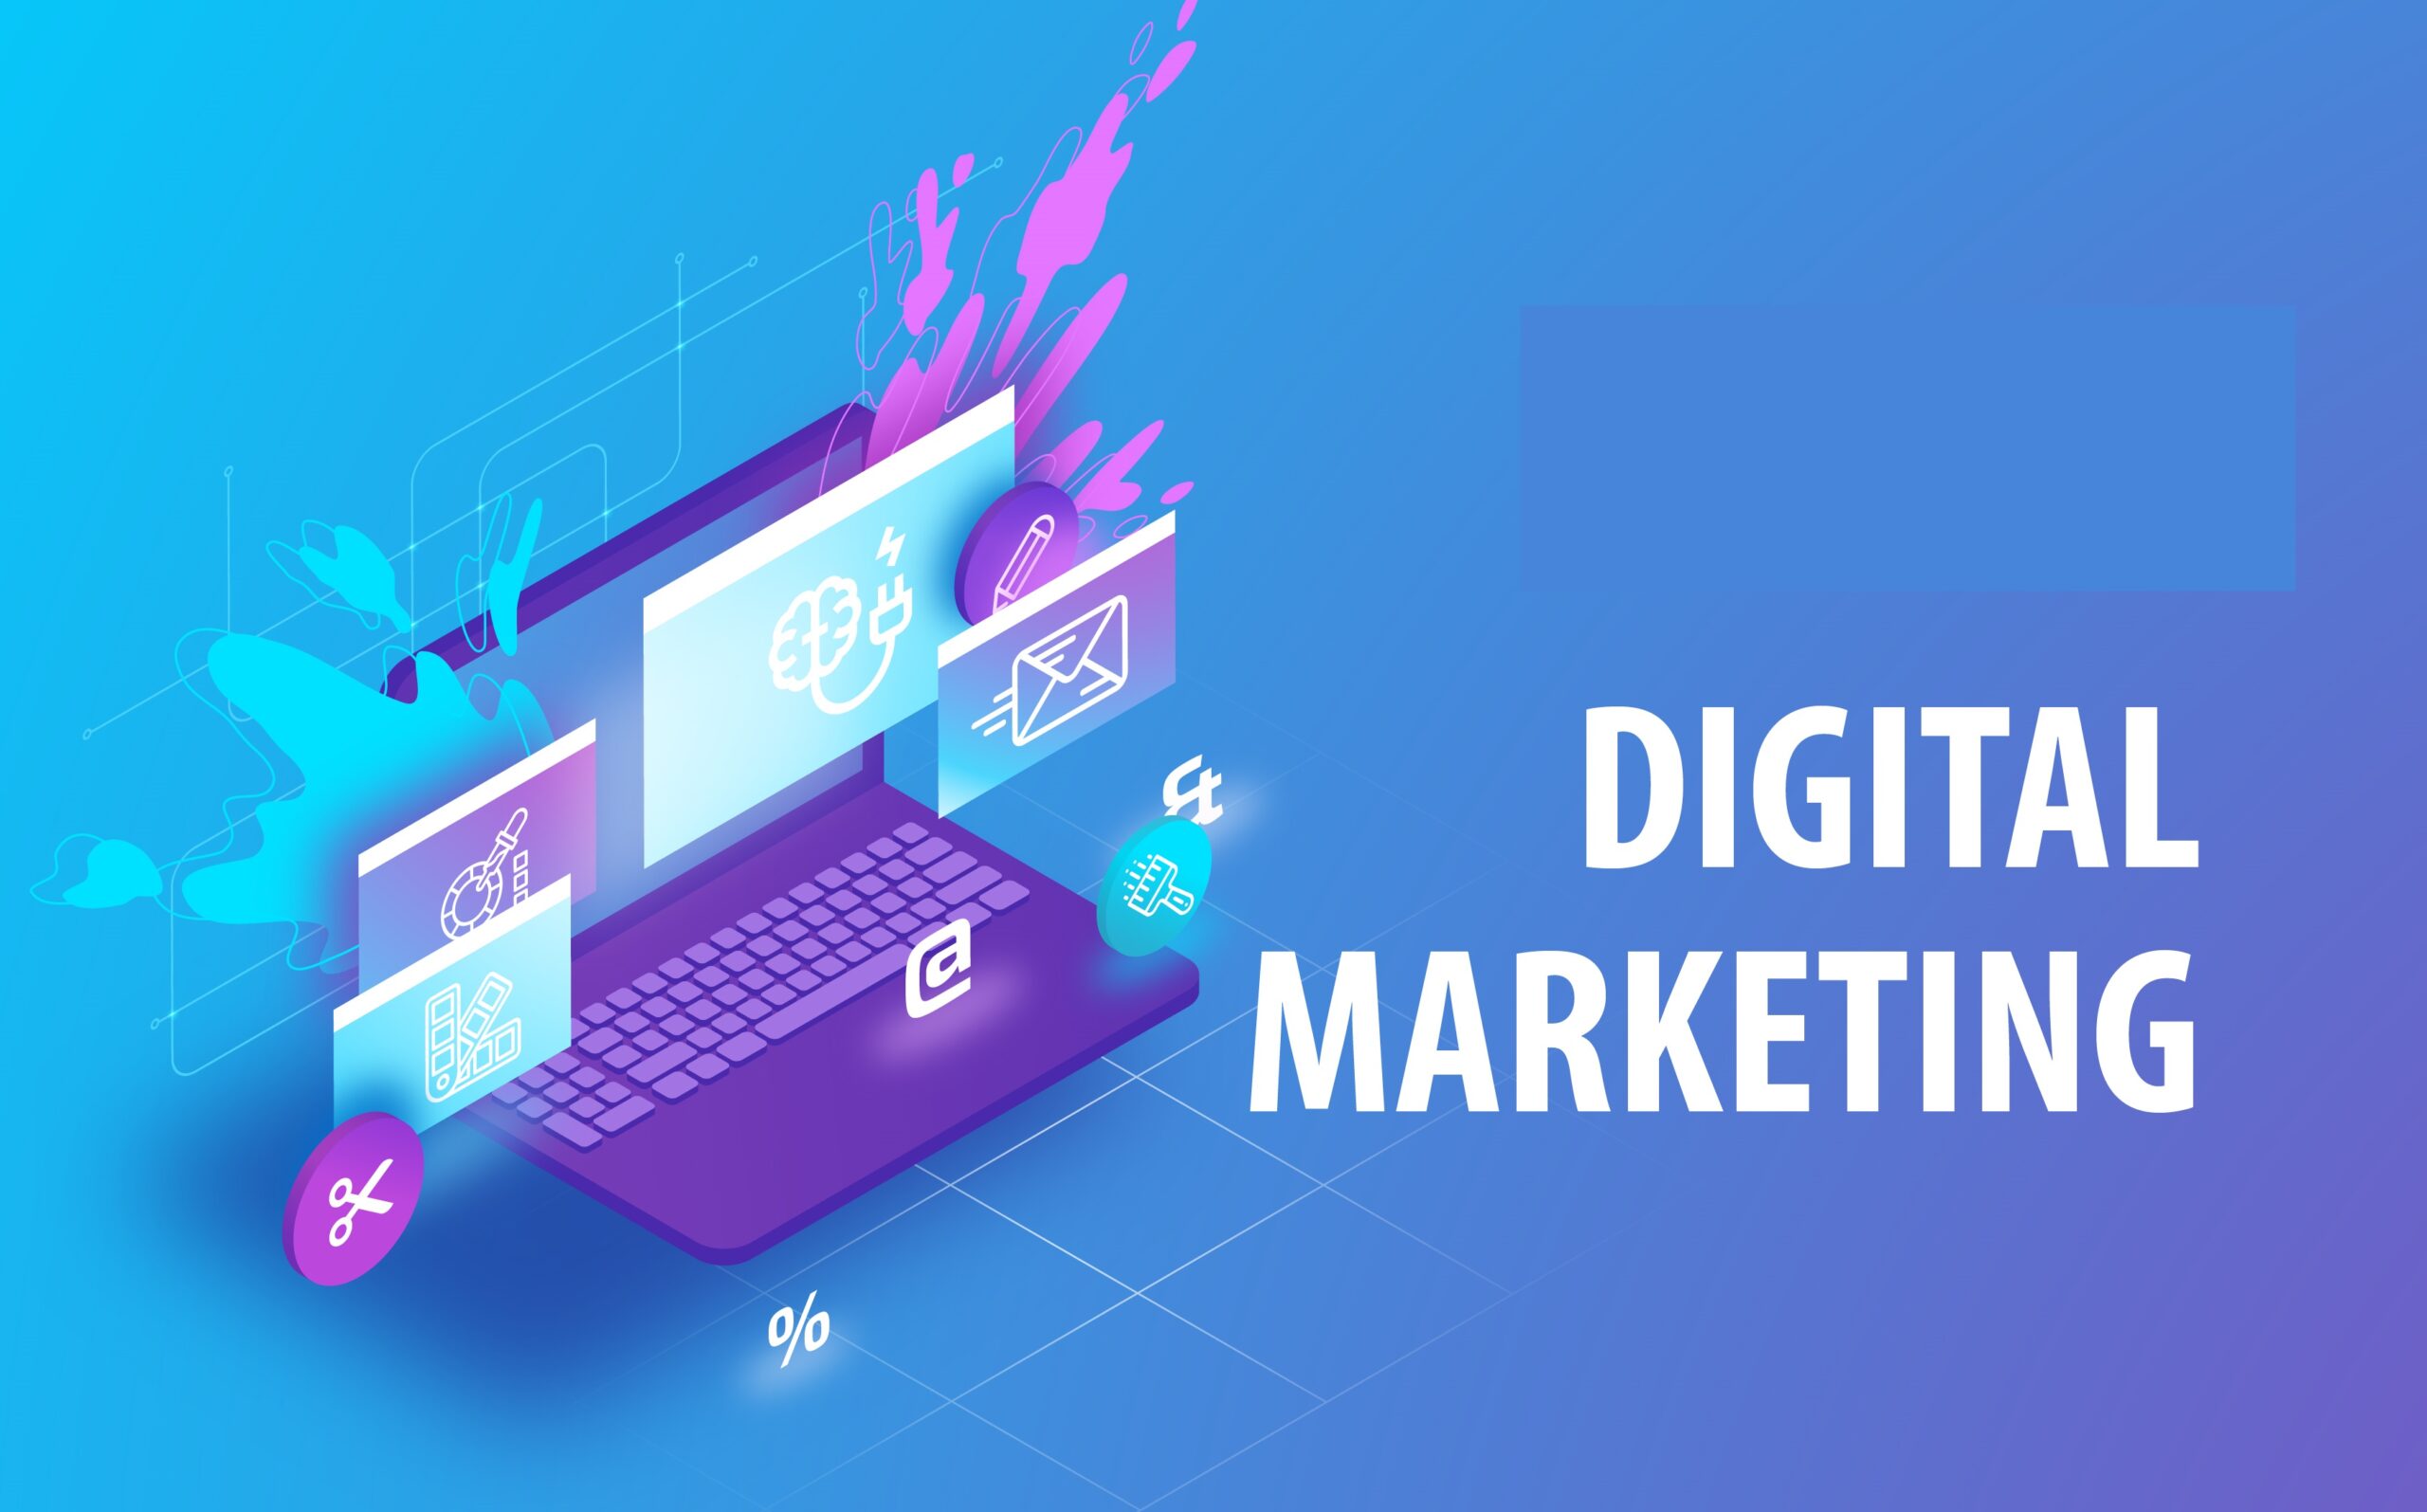 How Much Do Digital Marketing Packages Cost in India?